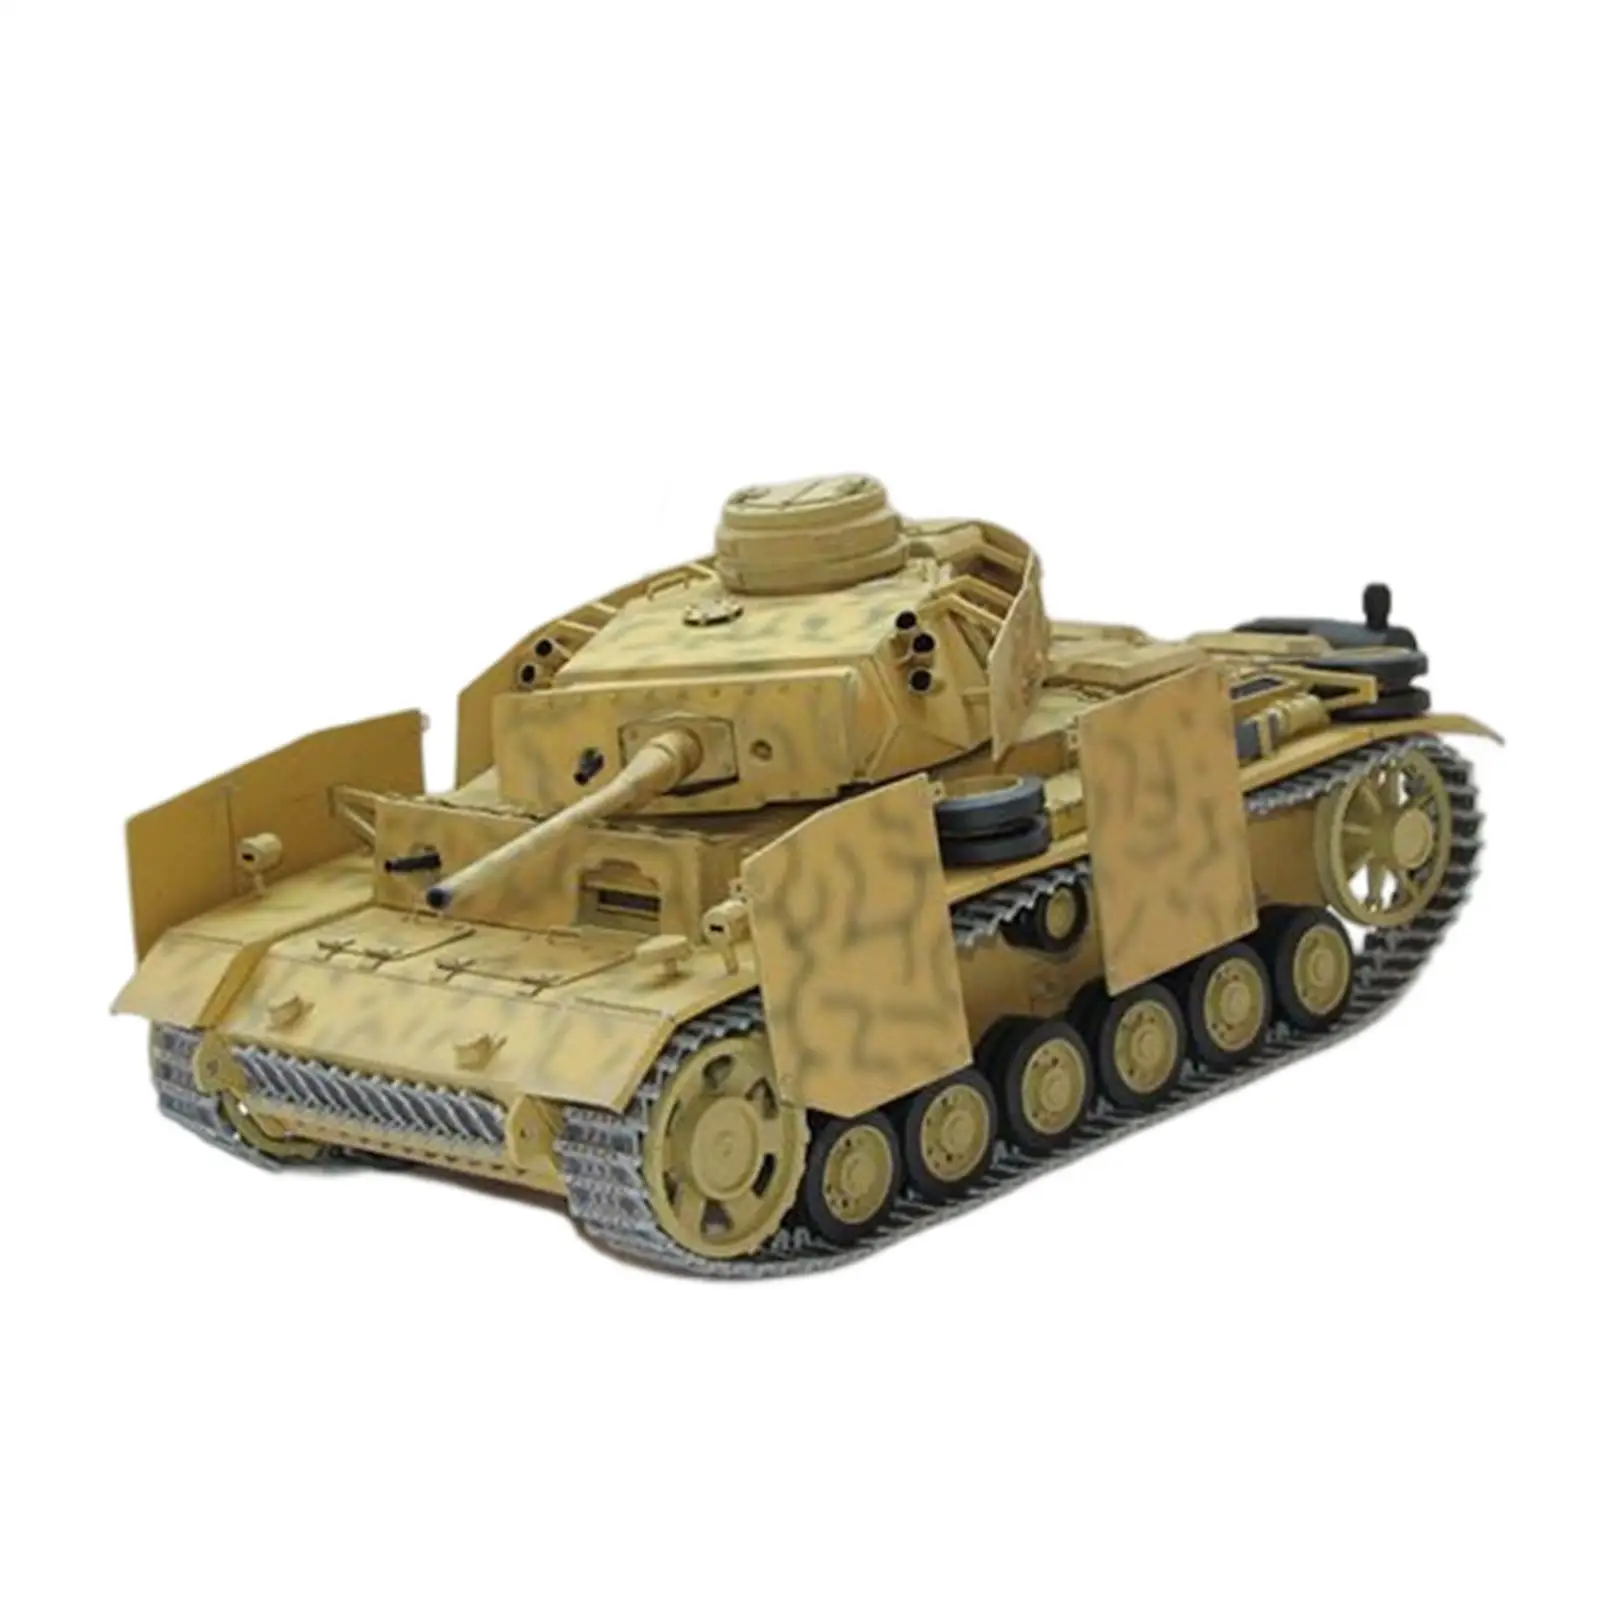 1:25 Tank Model Decorative Toy Building Collection Durable Gifts 3D Puzzle for Girls Boys Adults Kids Teenagers Beginners